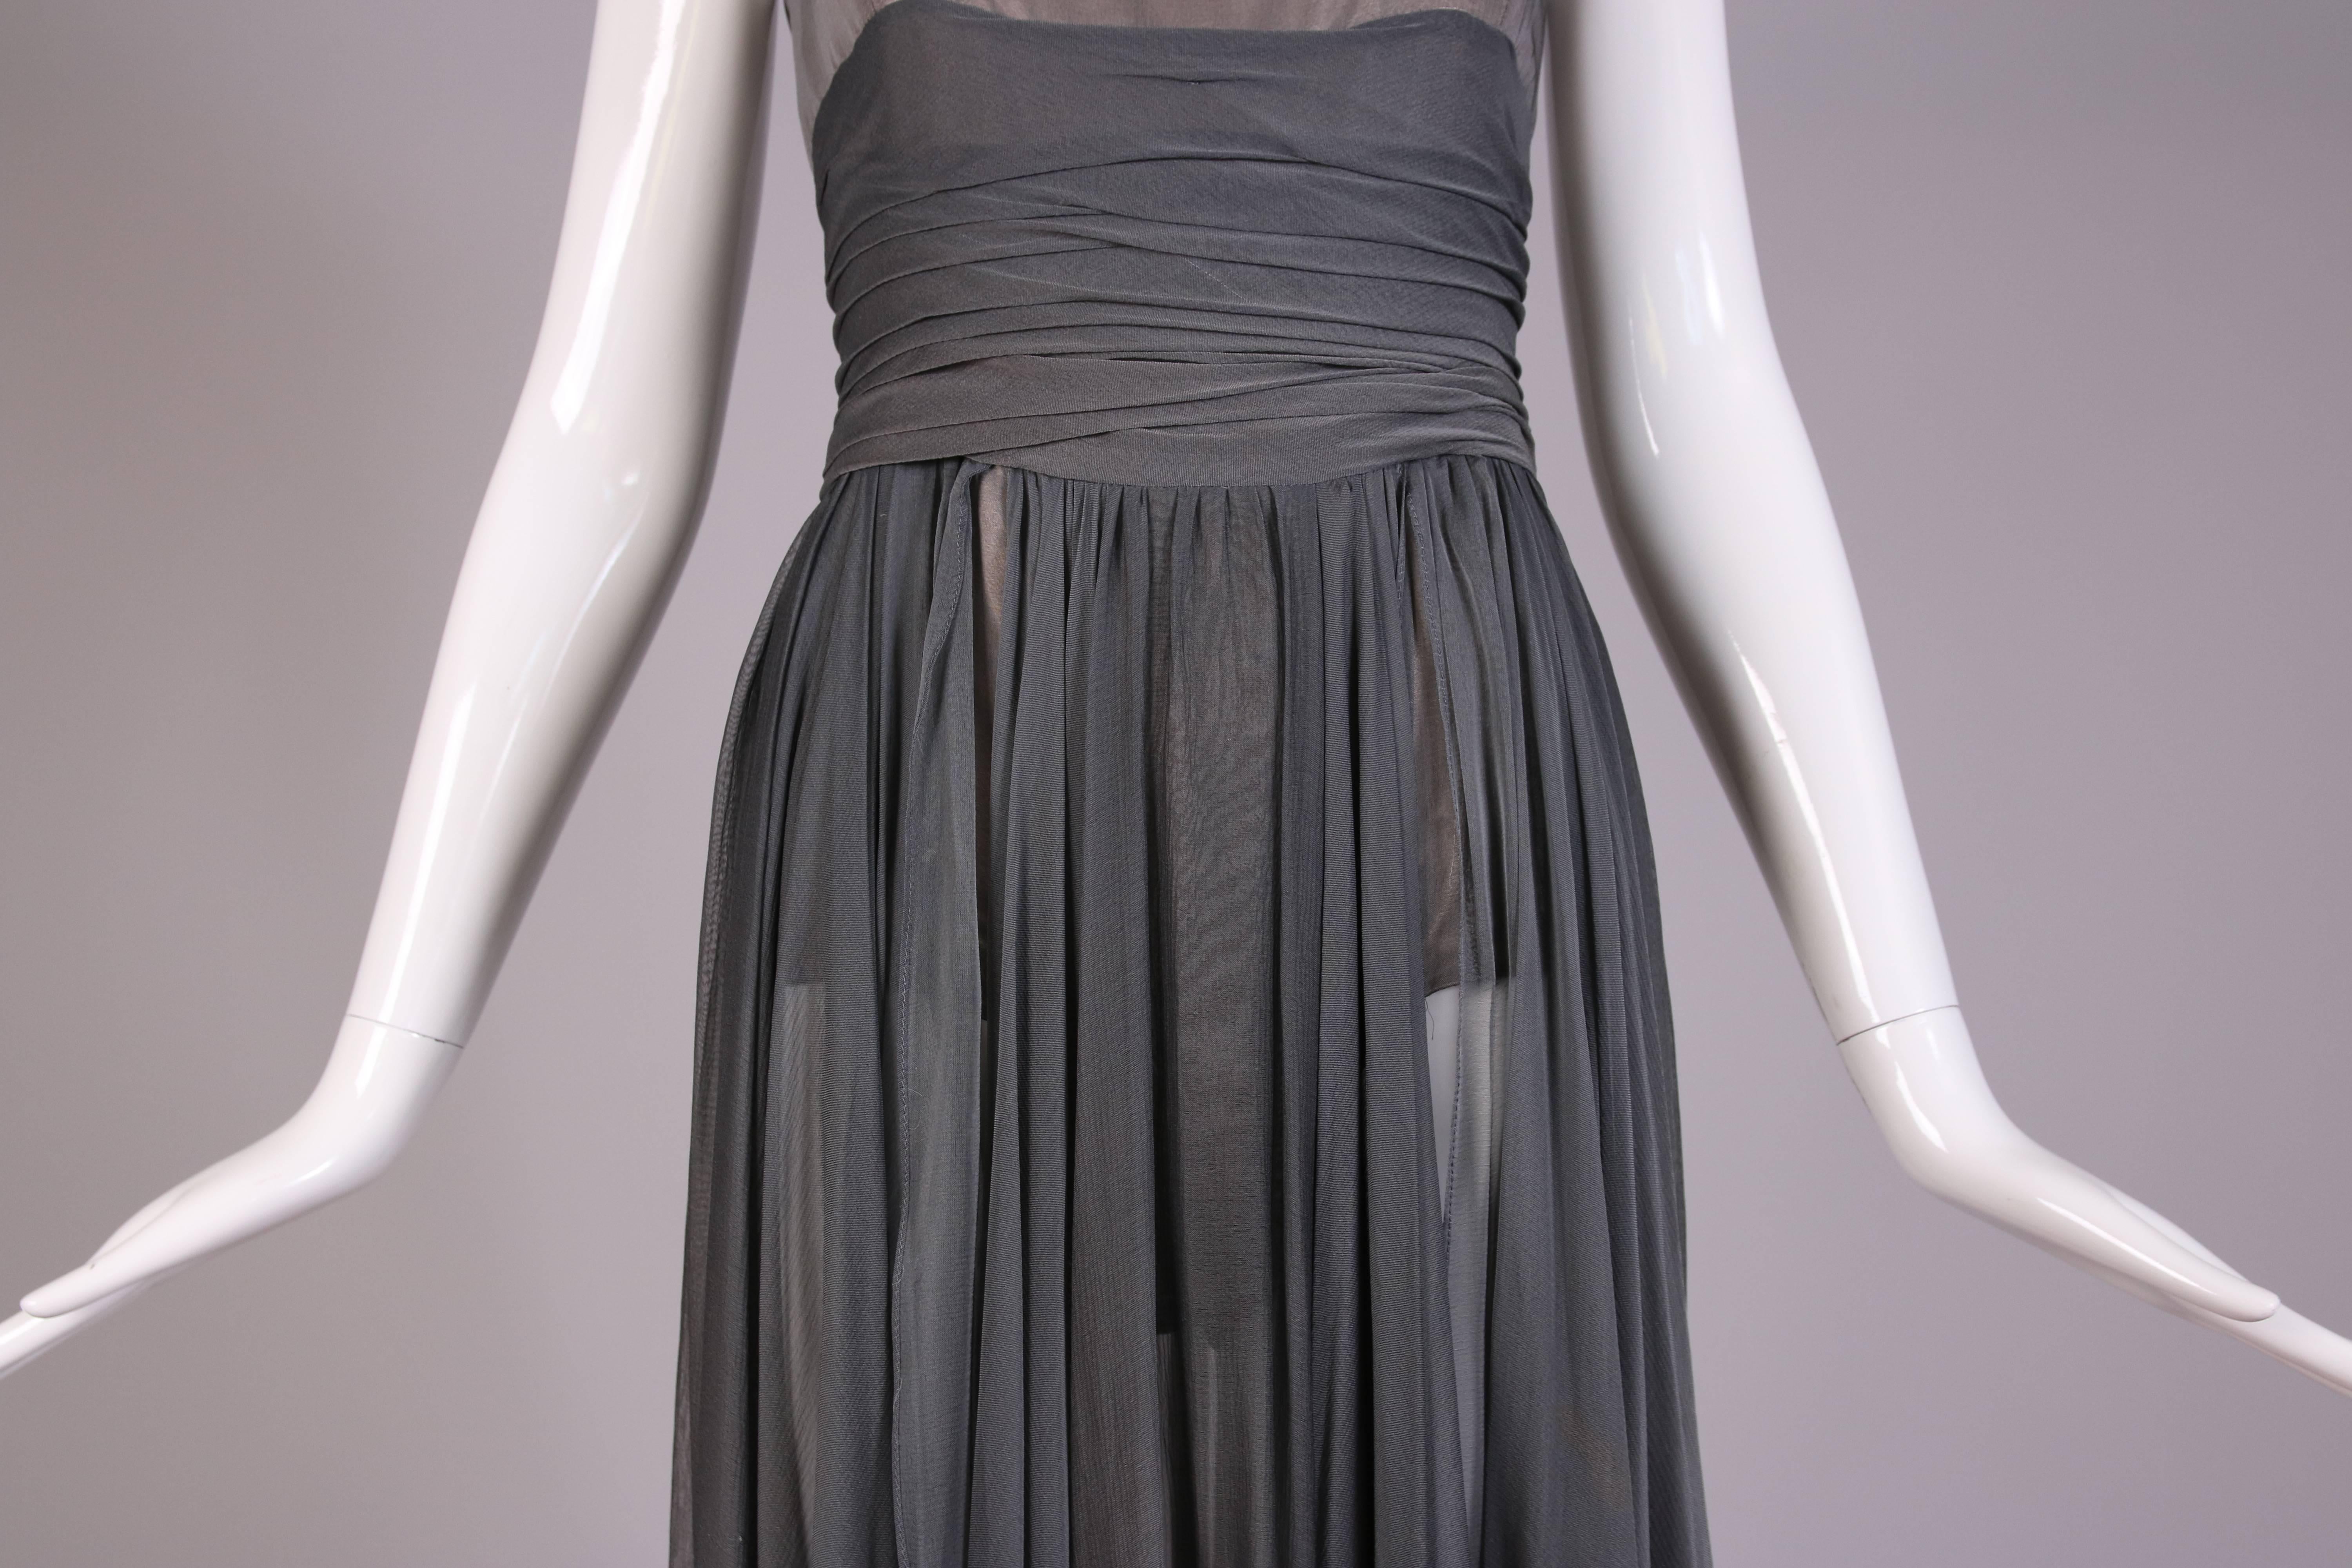 Chloe by Stella McCartney Gray Evening Gown  In Good Condition For Sale In Studio City, CA